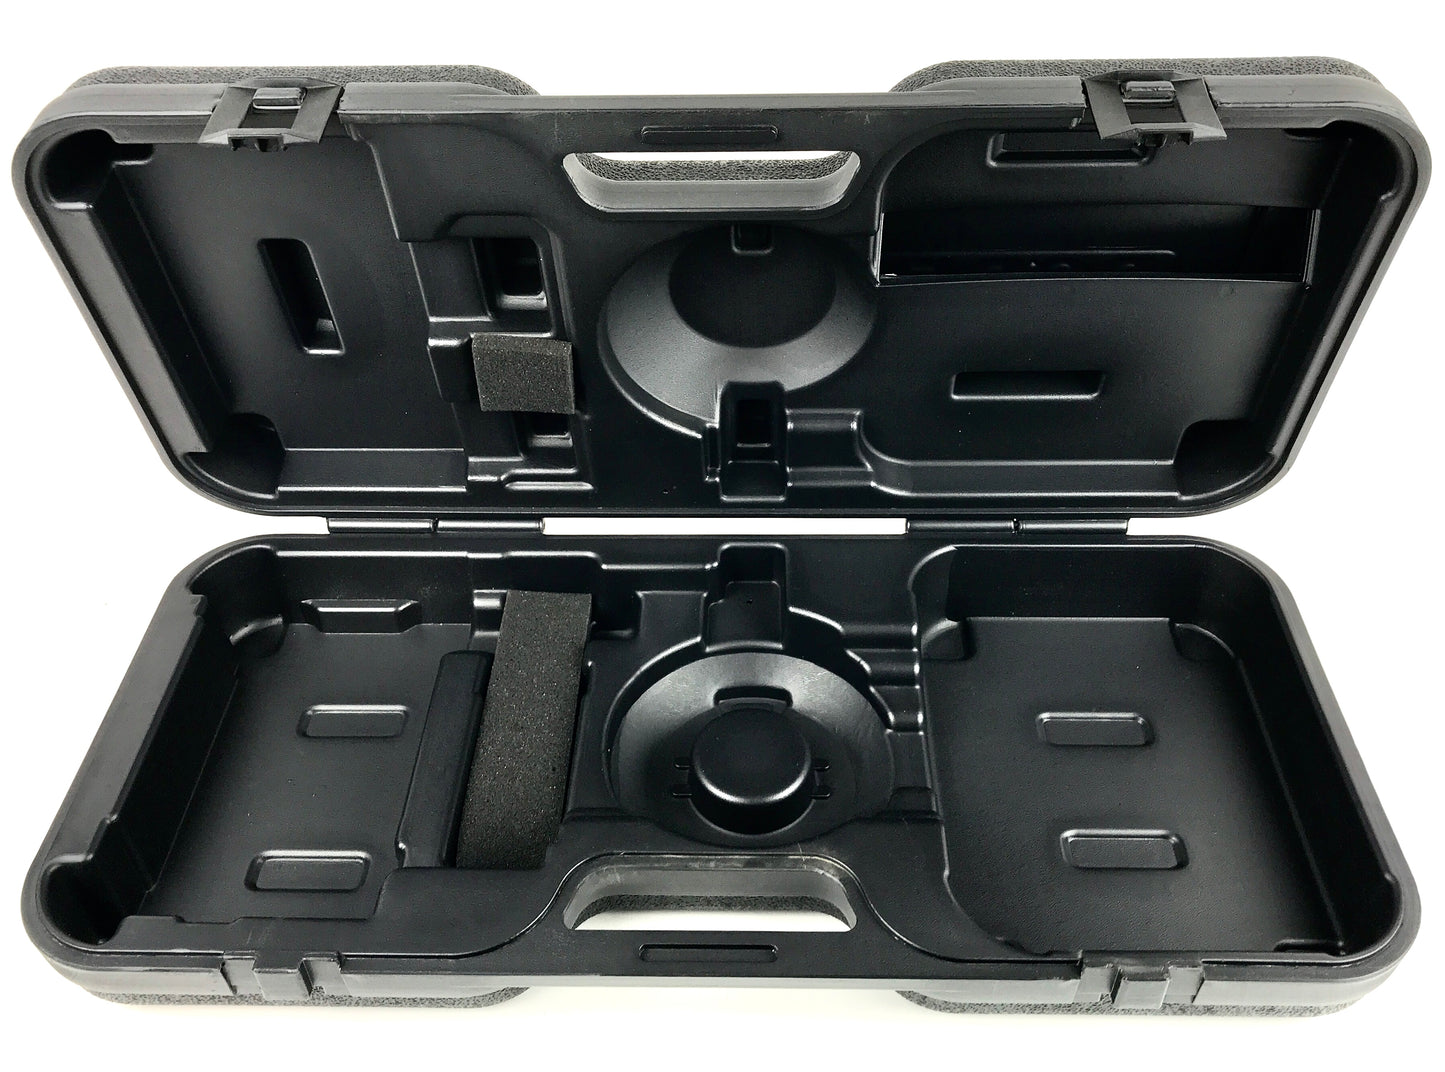 RC2 Molded Case for NTK or K2 microphone